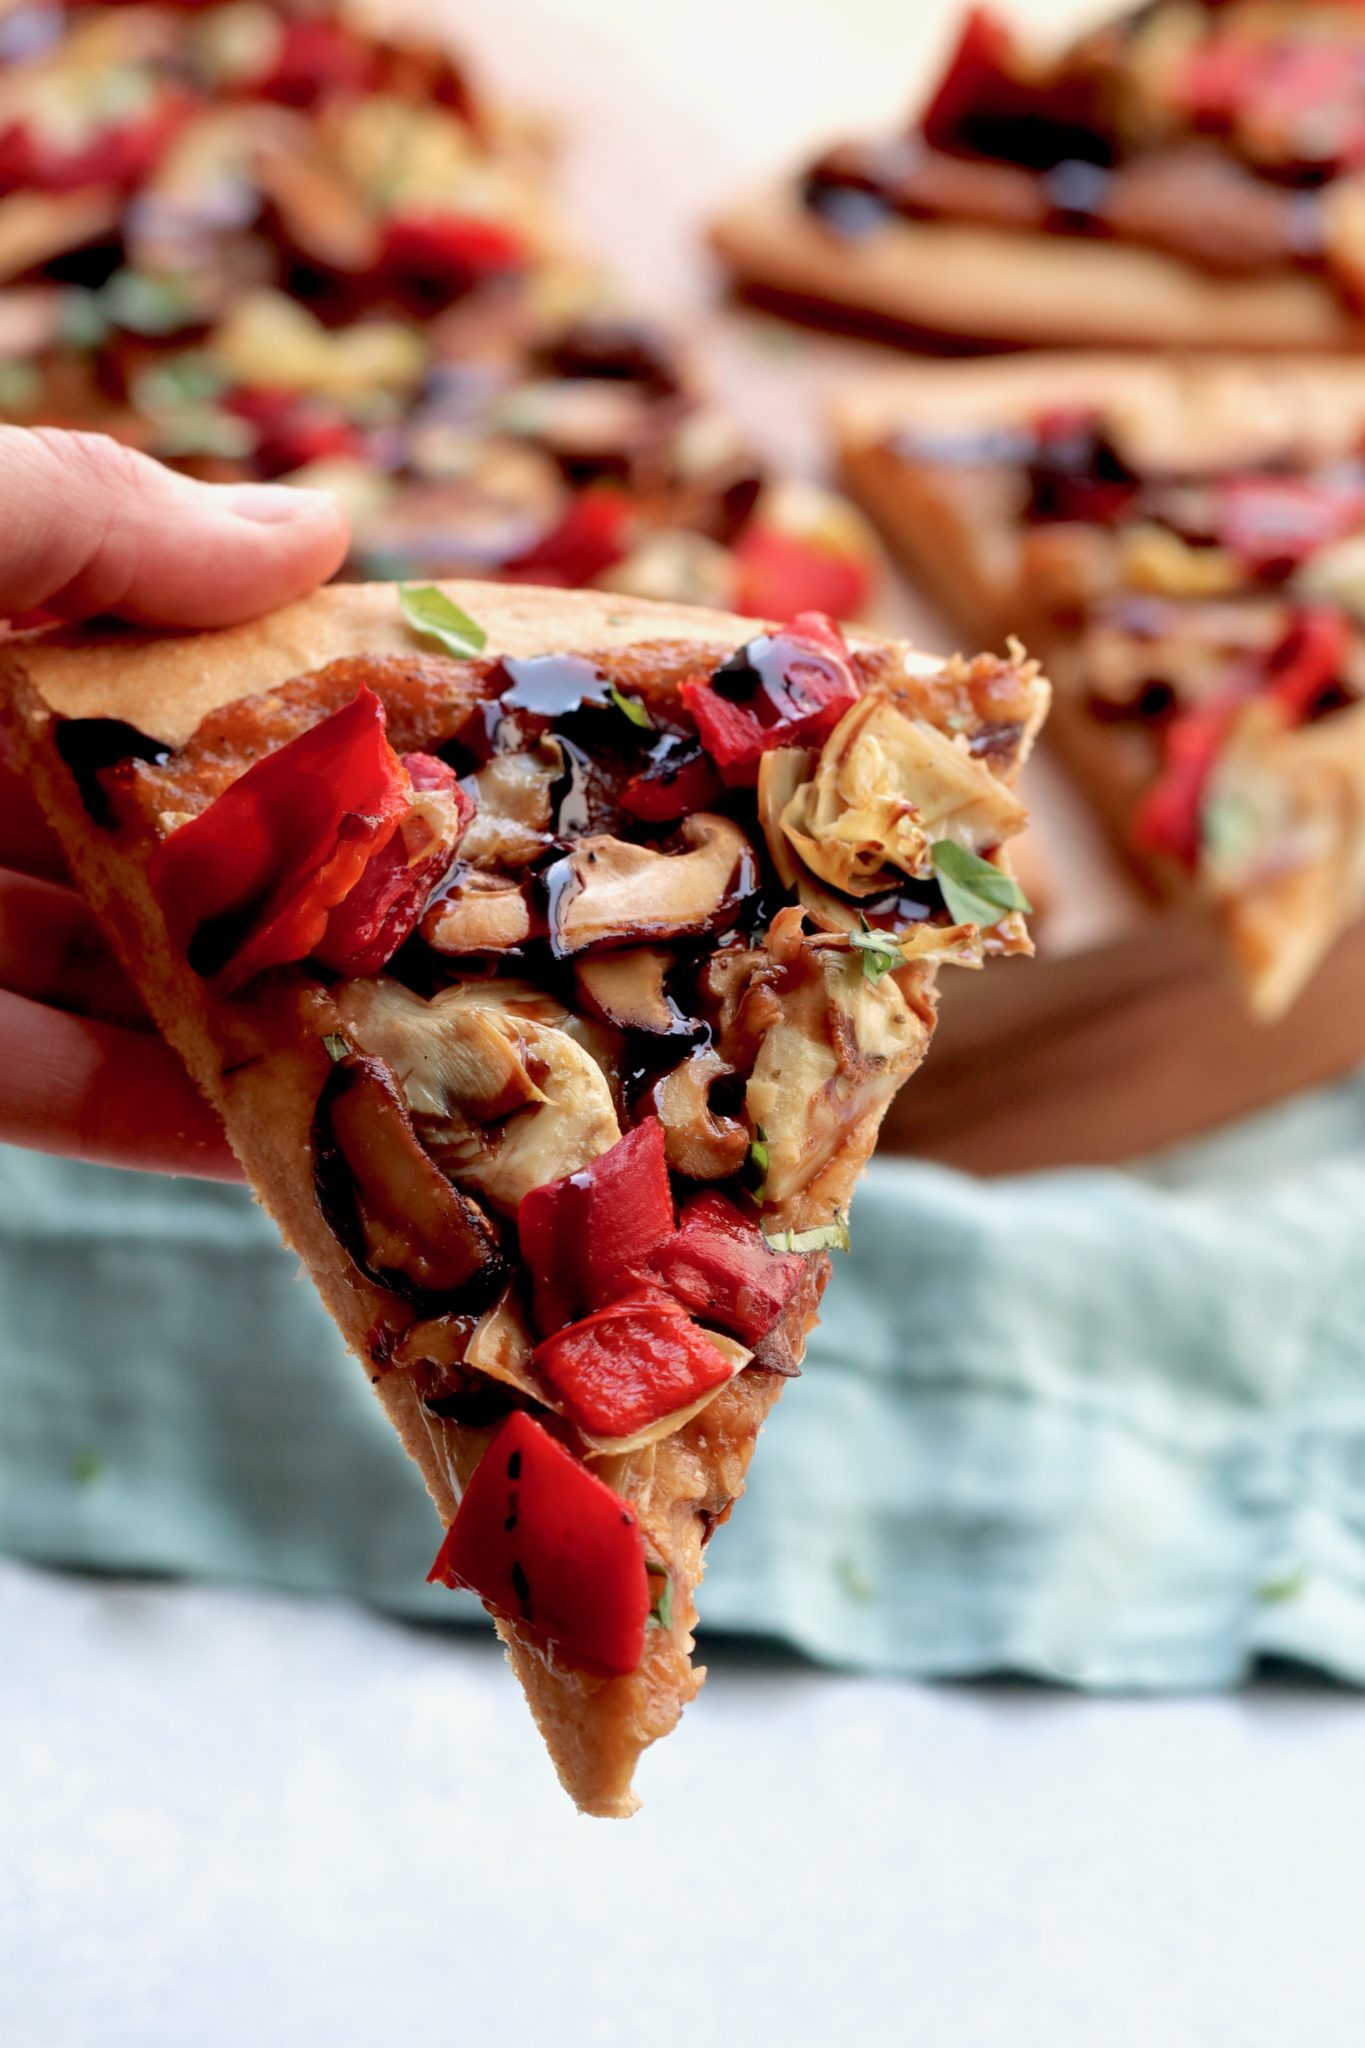 vegan roasted vegetable pizza (aka - my take on amy's) // cait's plate